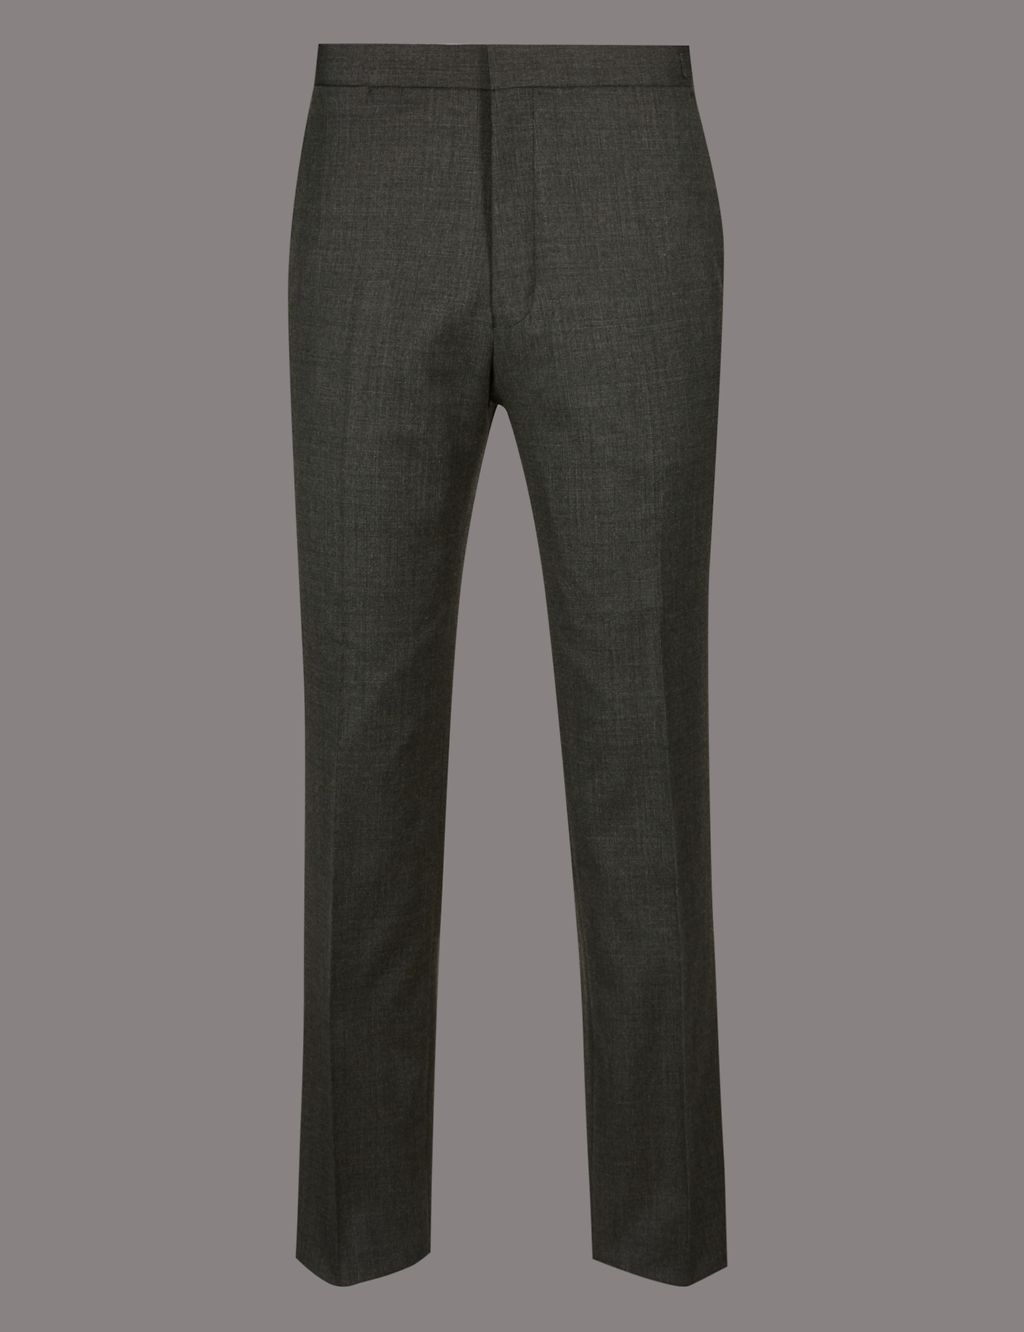 Charcoal Tailored Fit Italian Wool Trousers 1 of 5